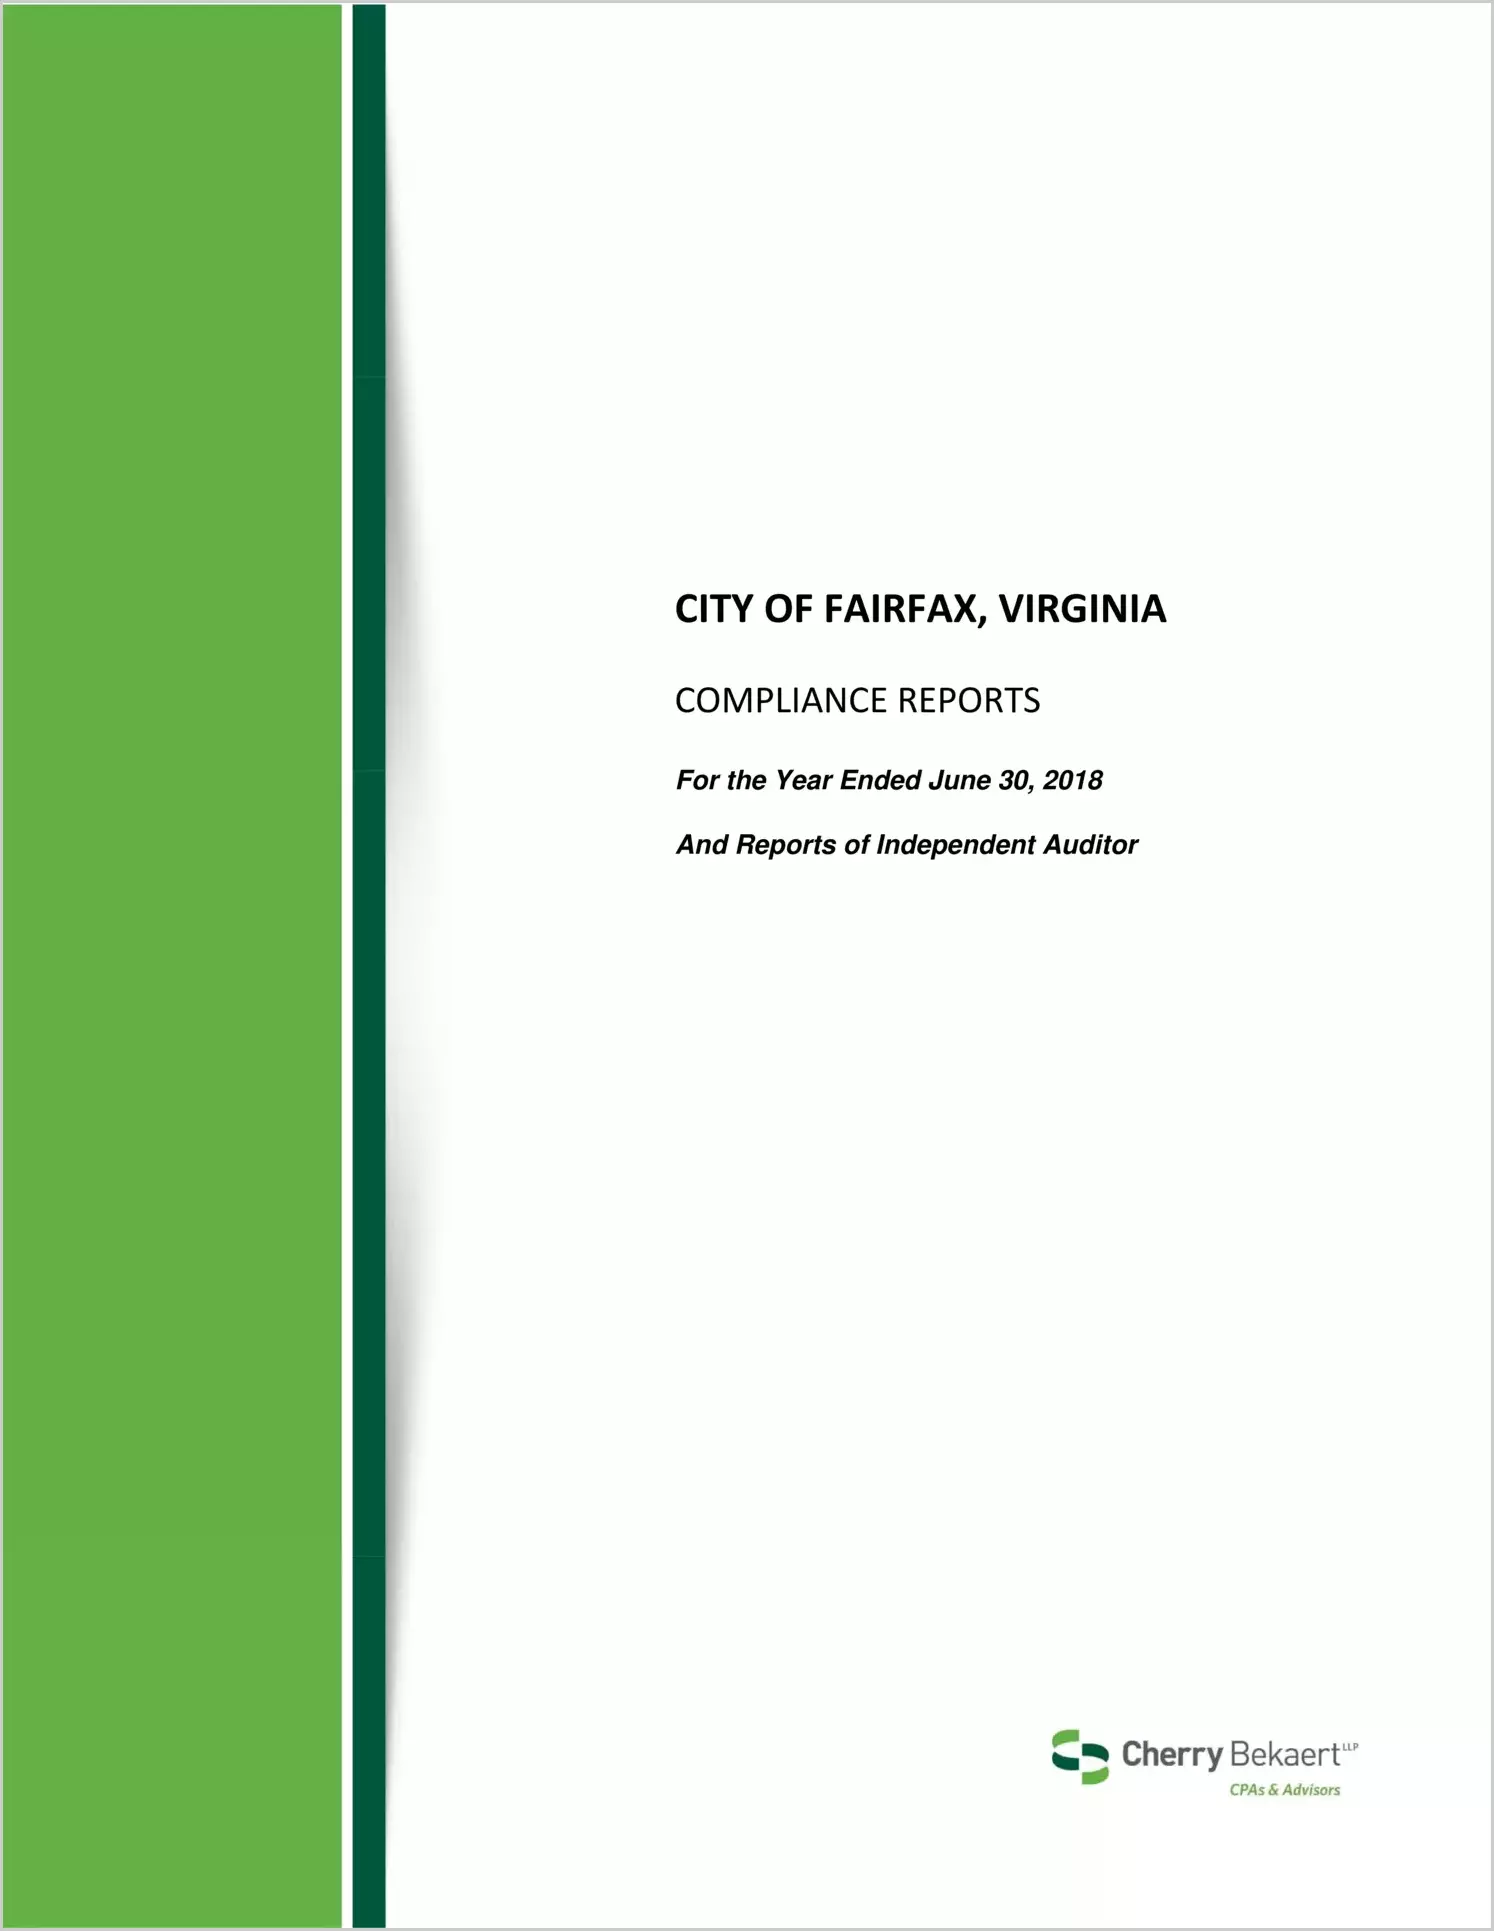 2018 Internal Control and Compliance Report for City of Fairfax